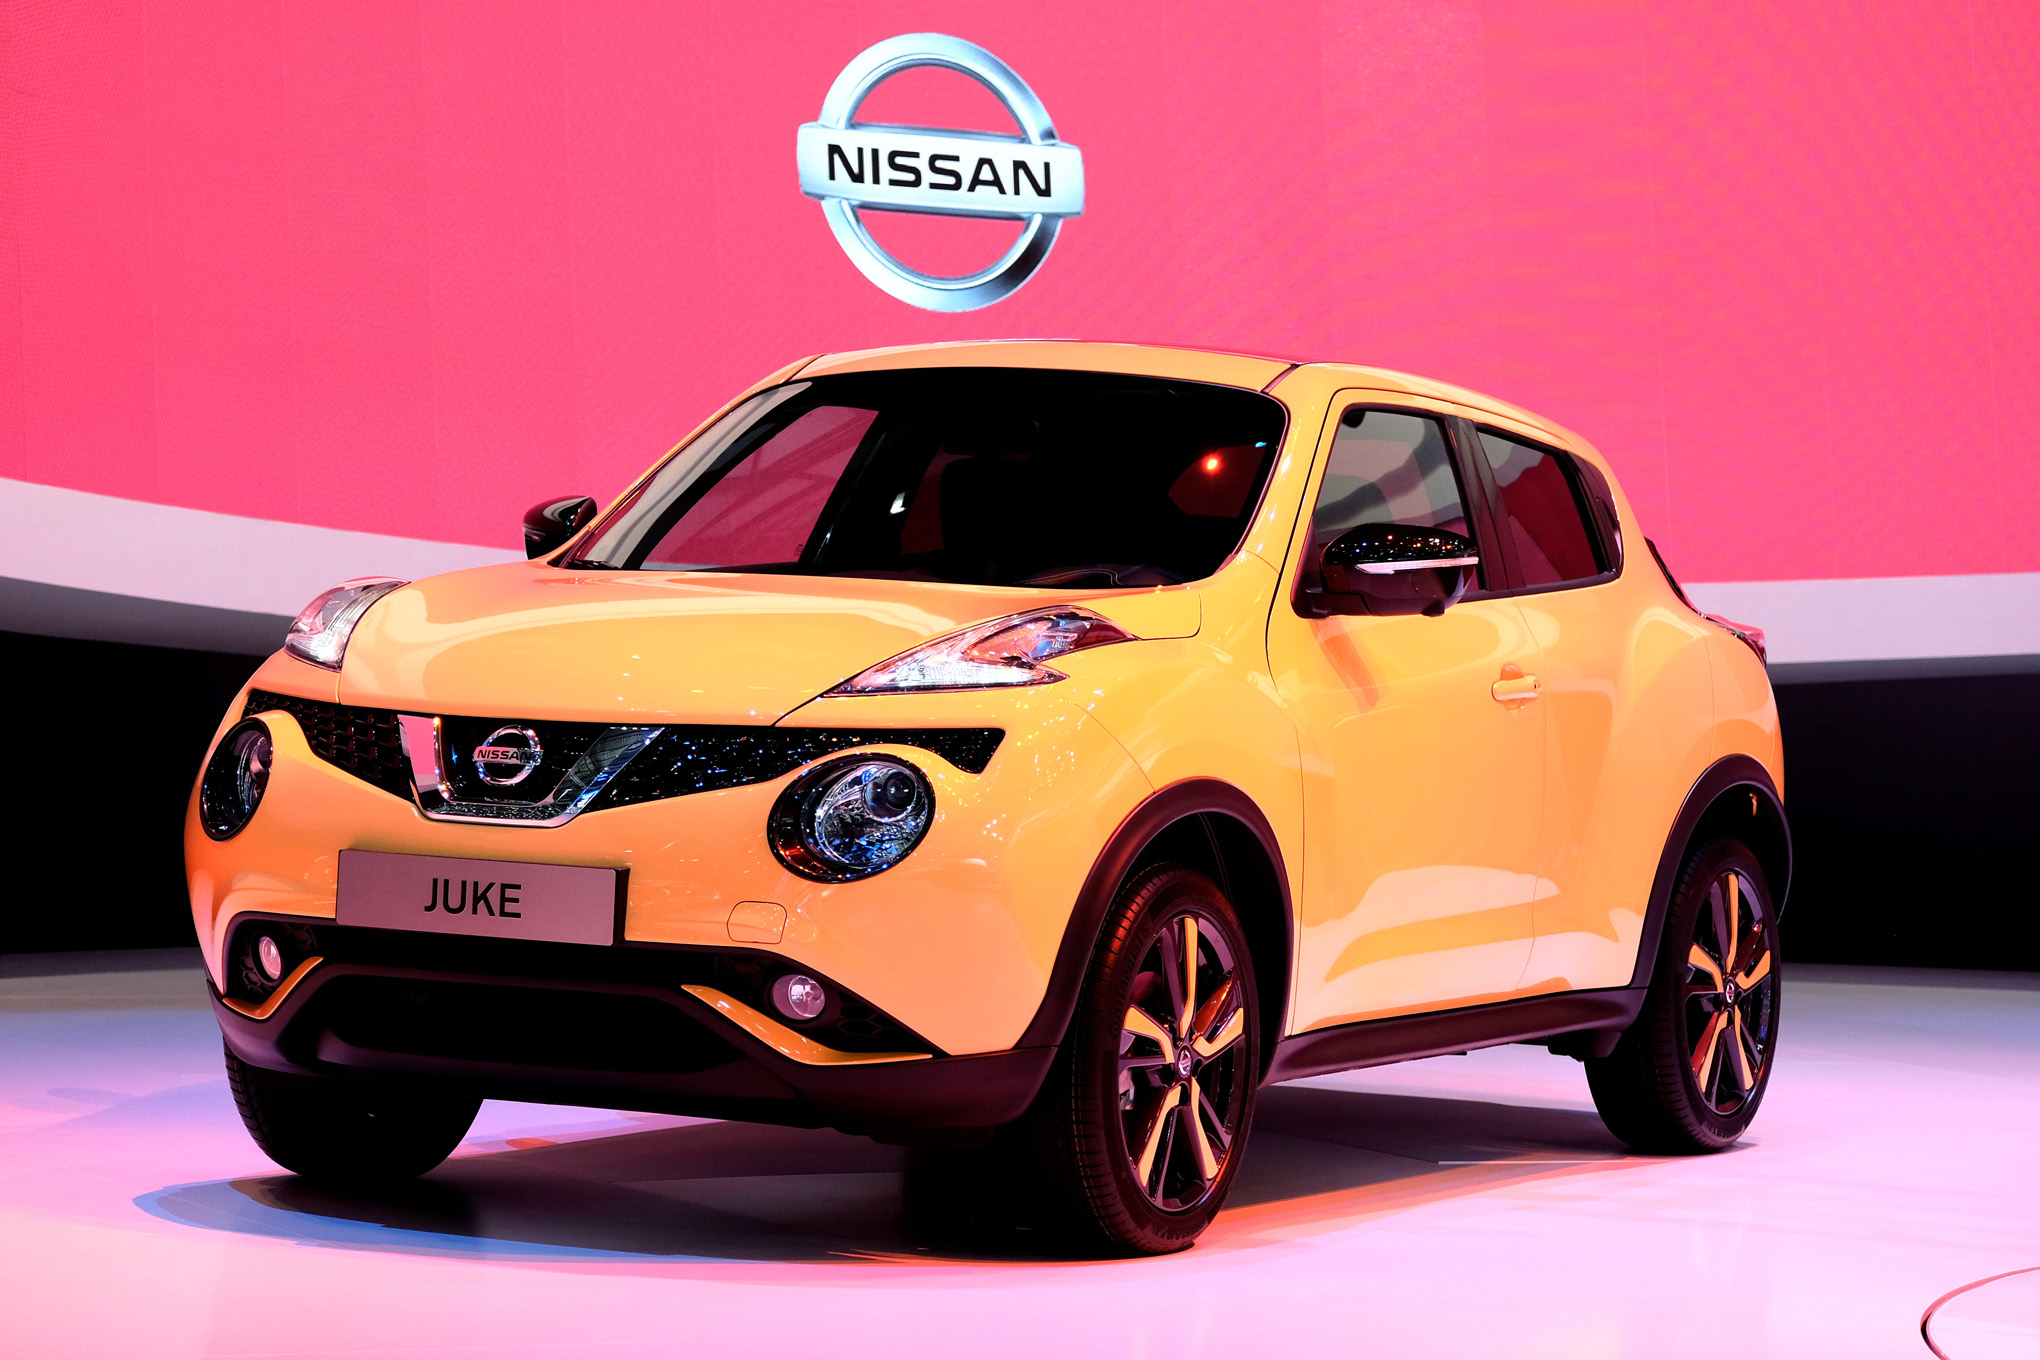 2021 Nissan Juke  Exterior and interior Details Visual Review  YouTube